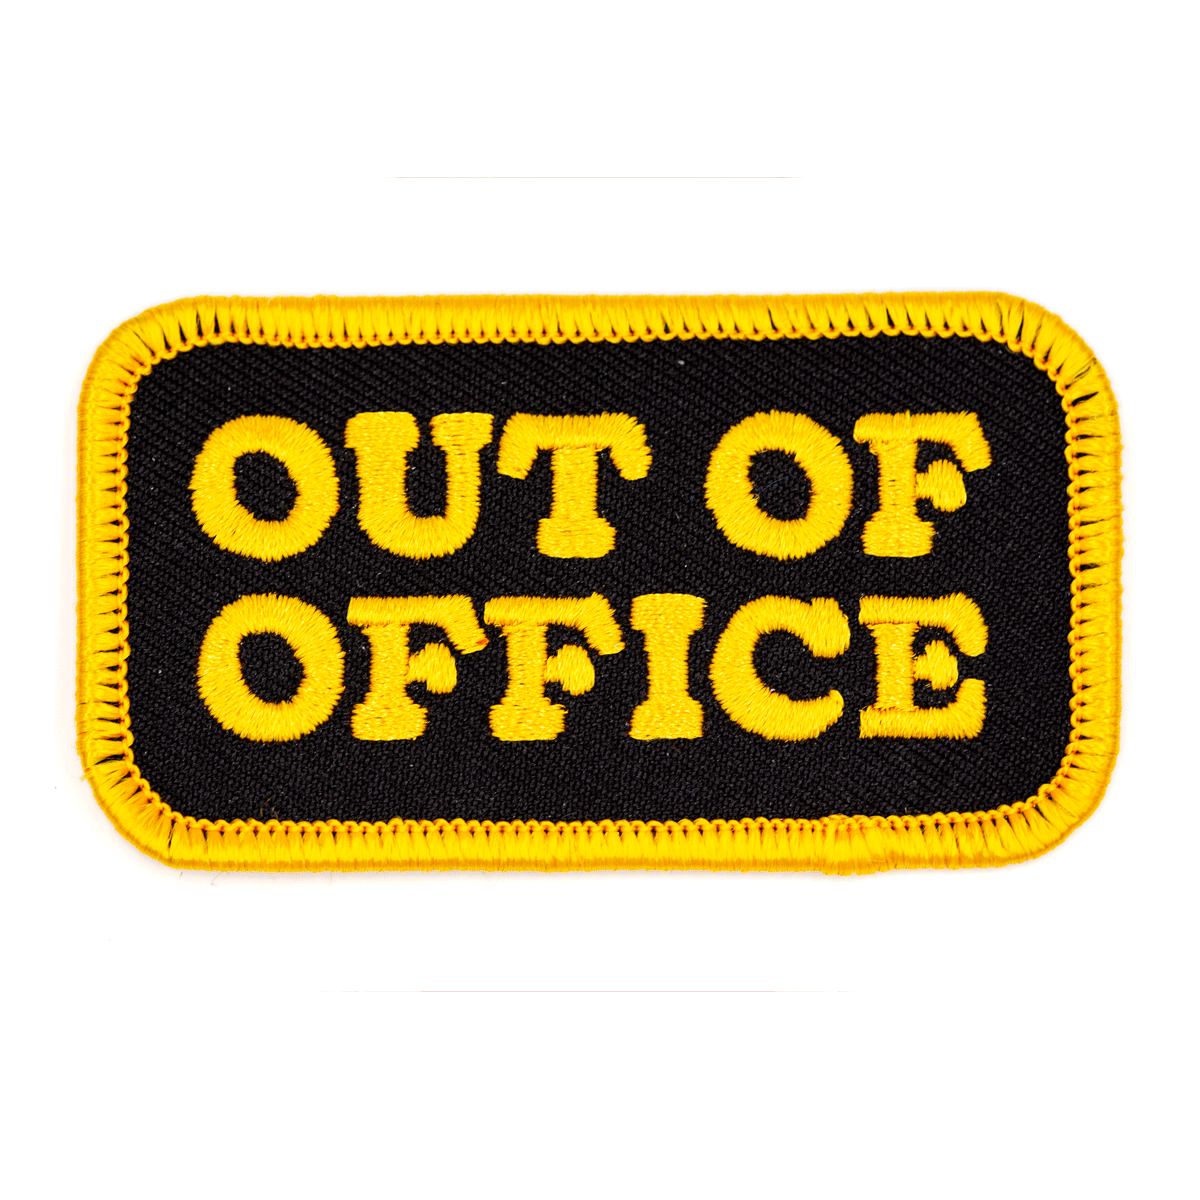 Out Of Office Patch